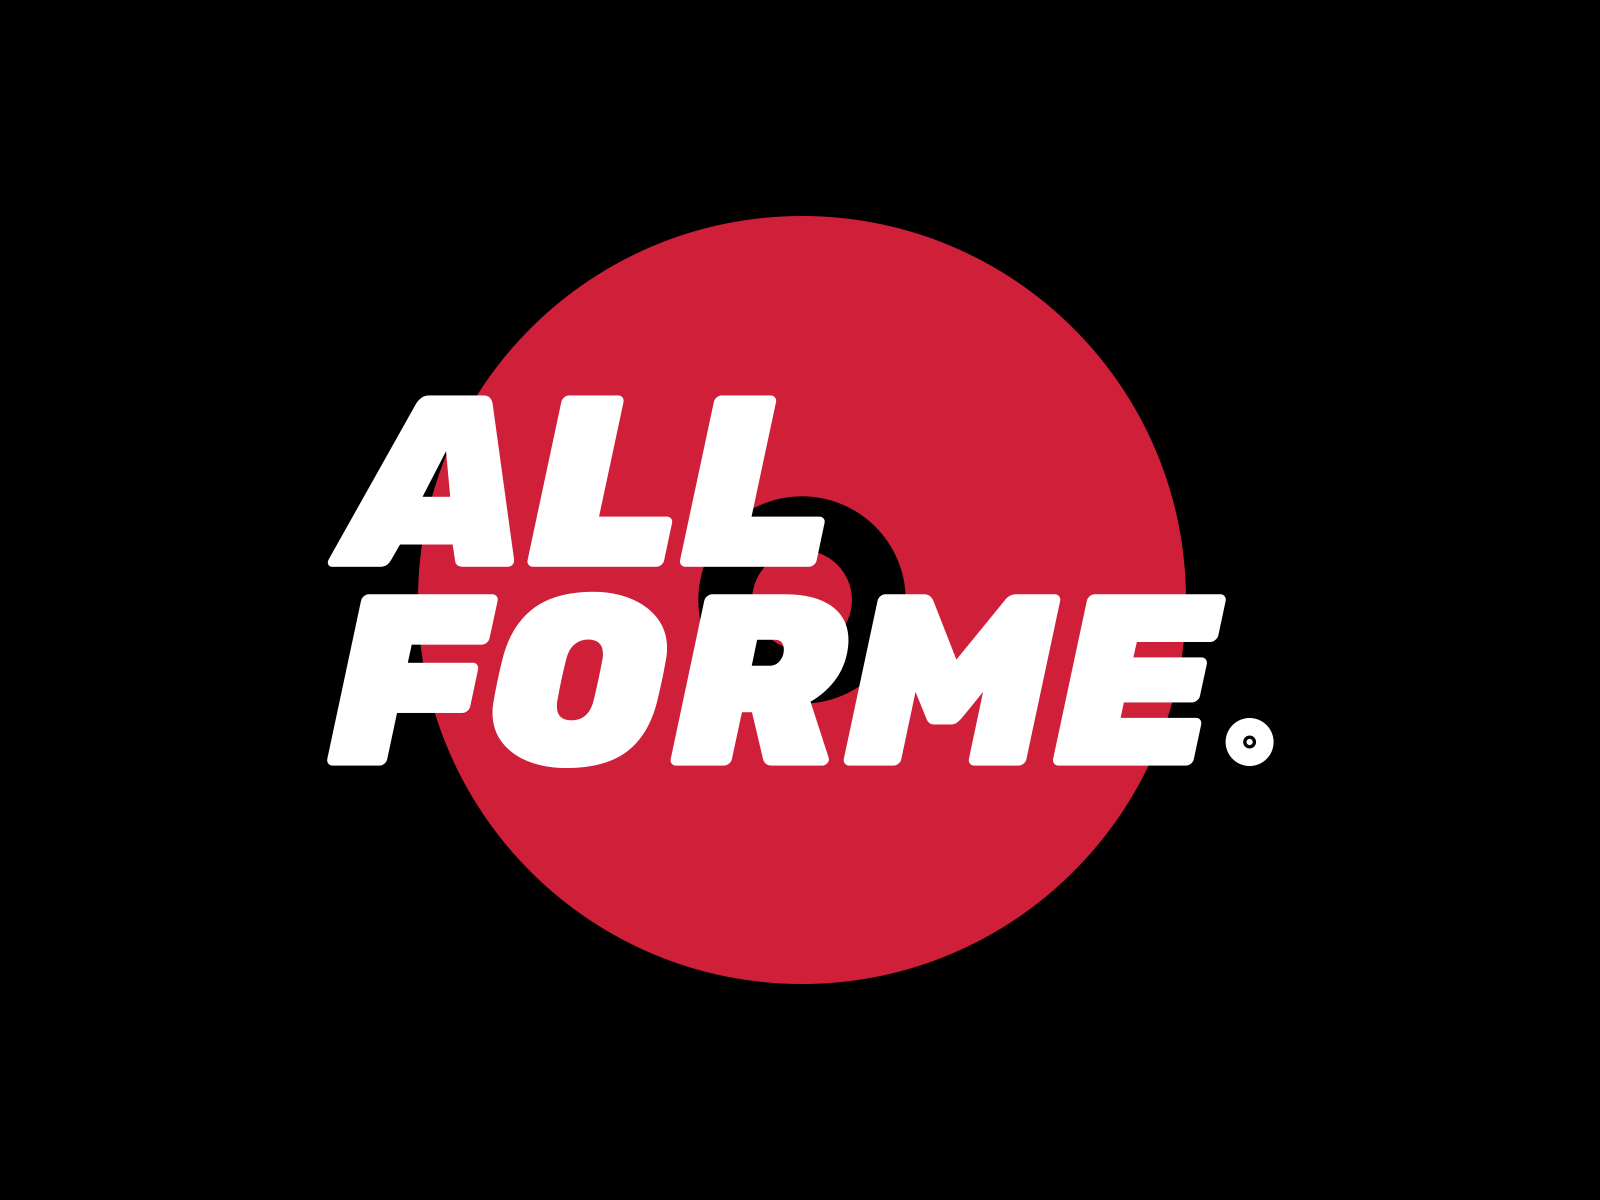 All – Forme